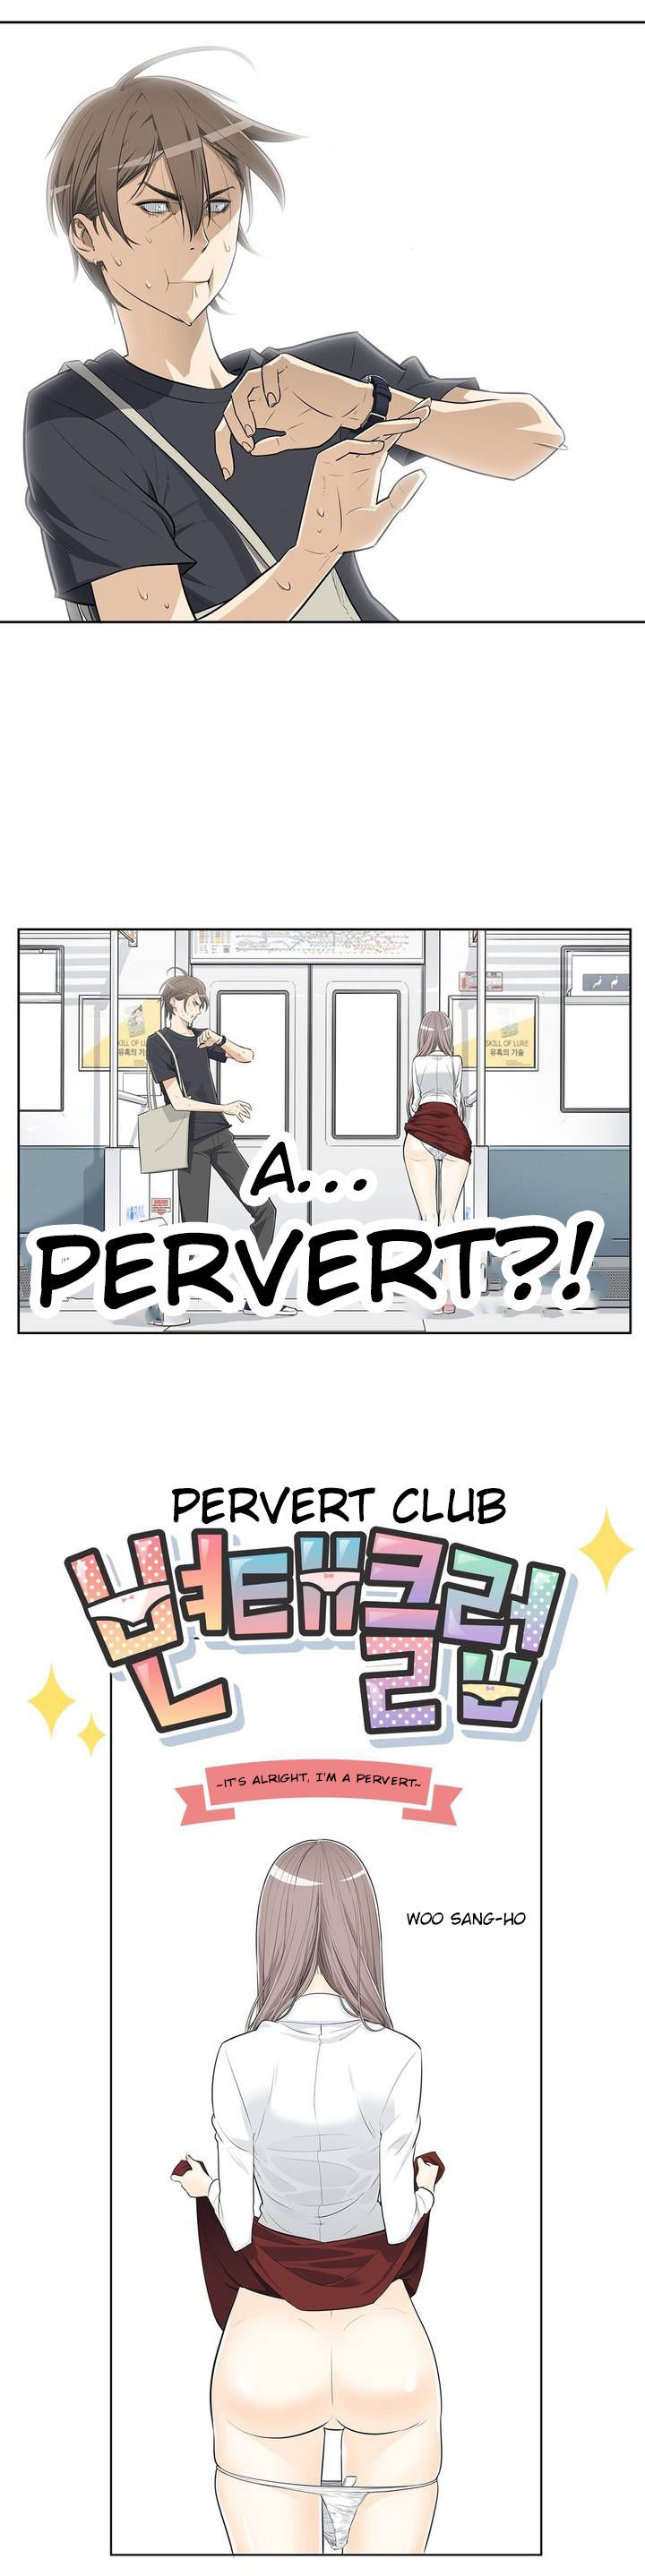 Pervert Club - Chapter 1 Page 11